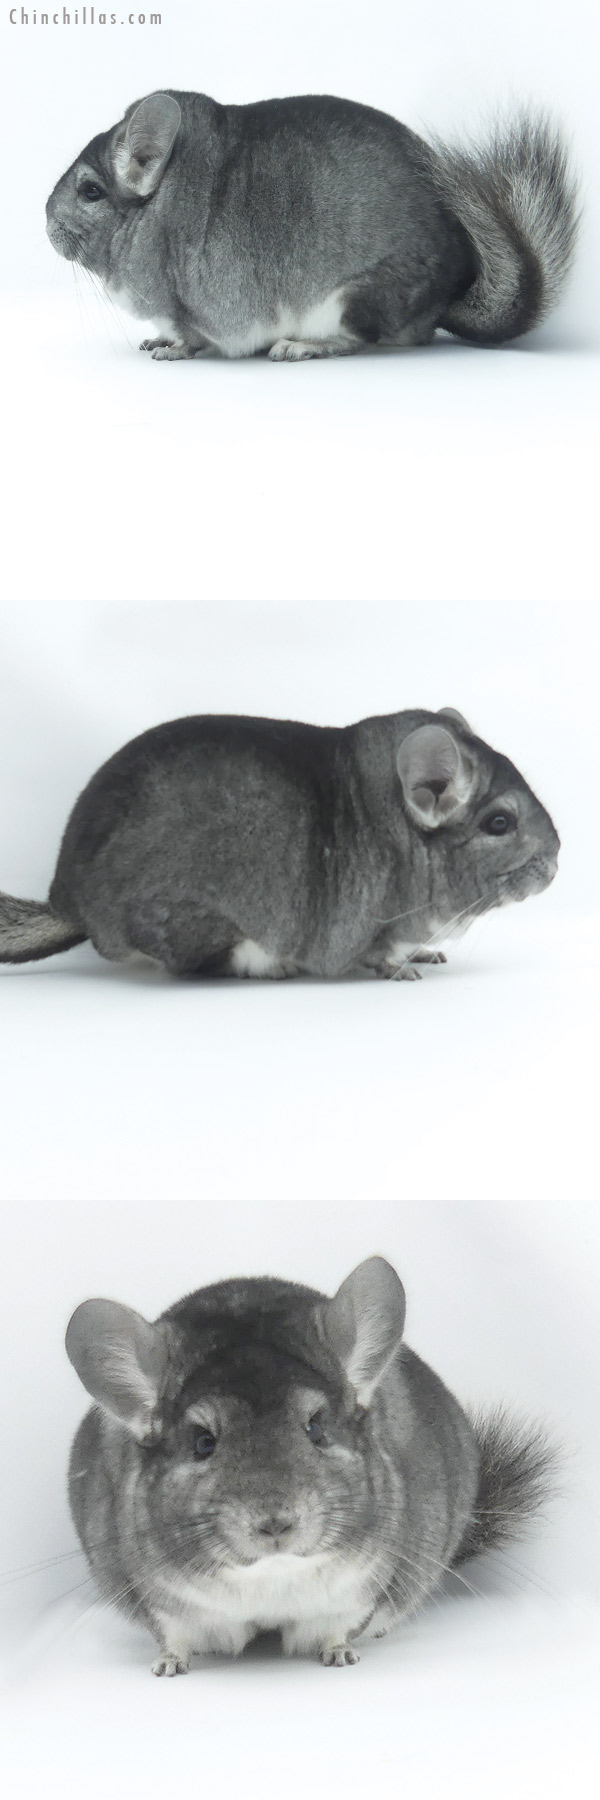 Chinchilla or related item offered for sale or export on Chinchillas.com - 19475 Large Blocky Premium Production Quality Standard Female Chinchilla